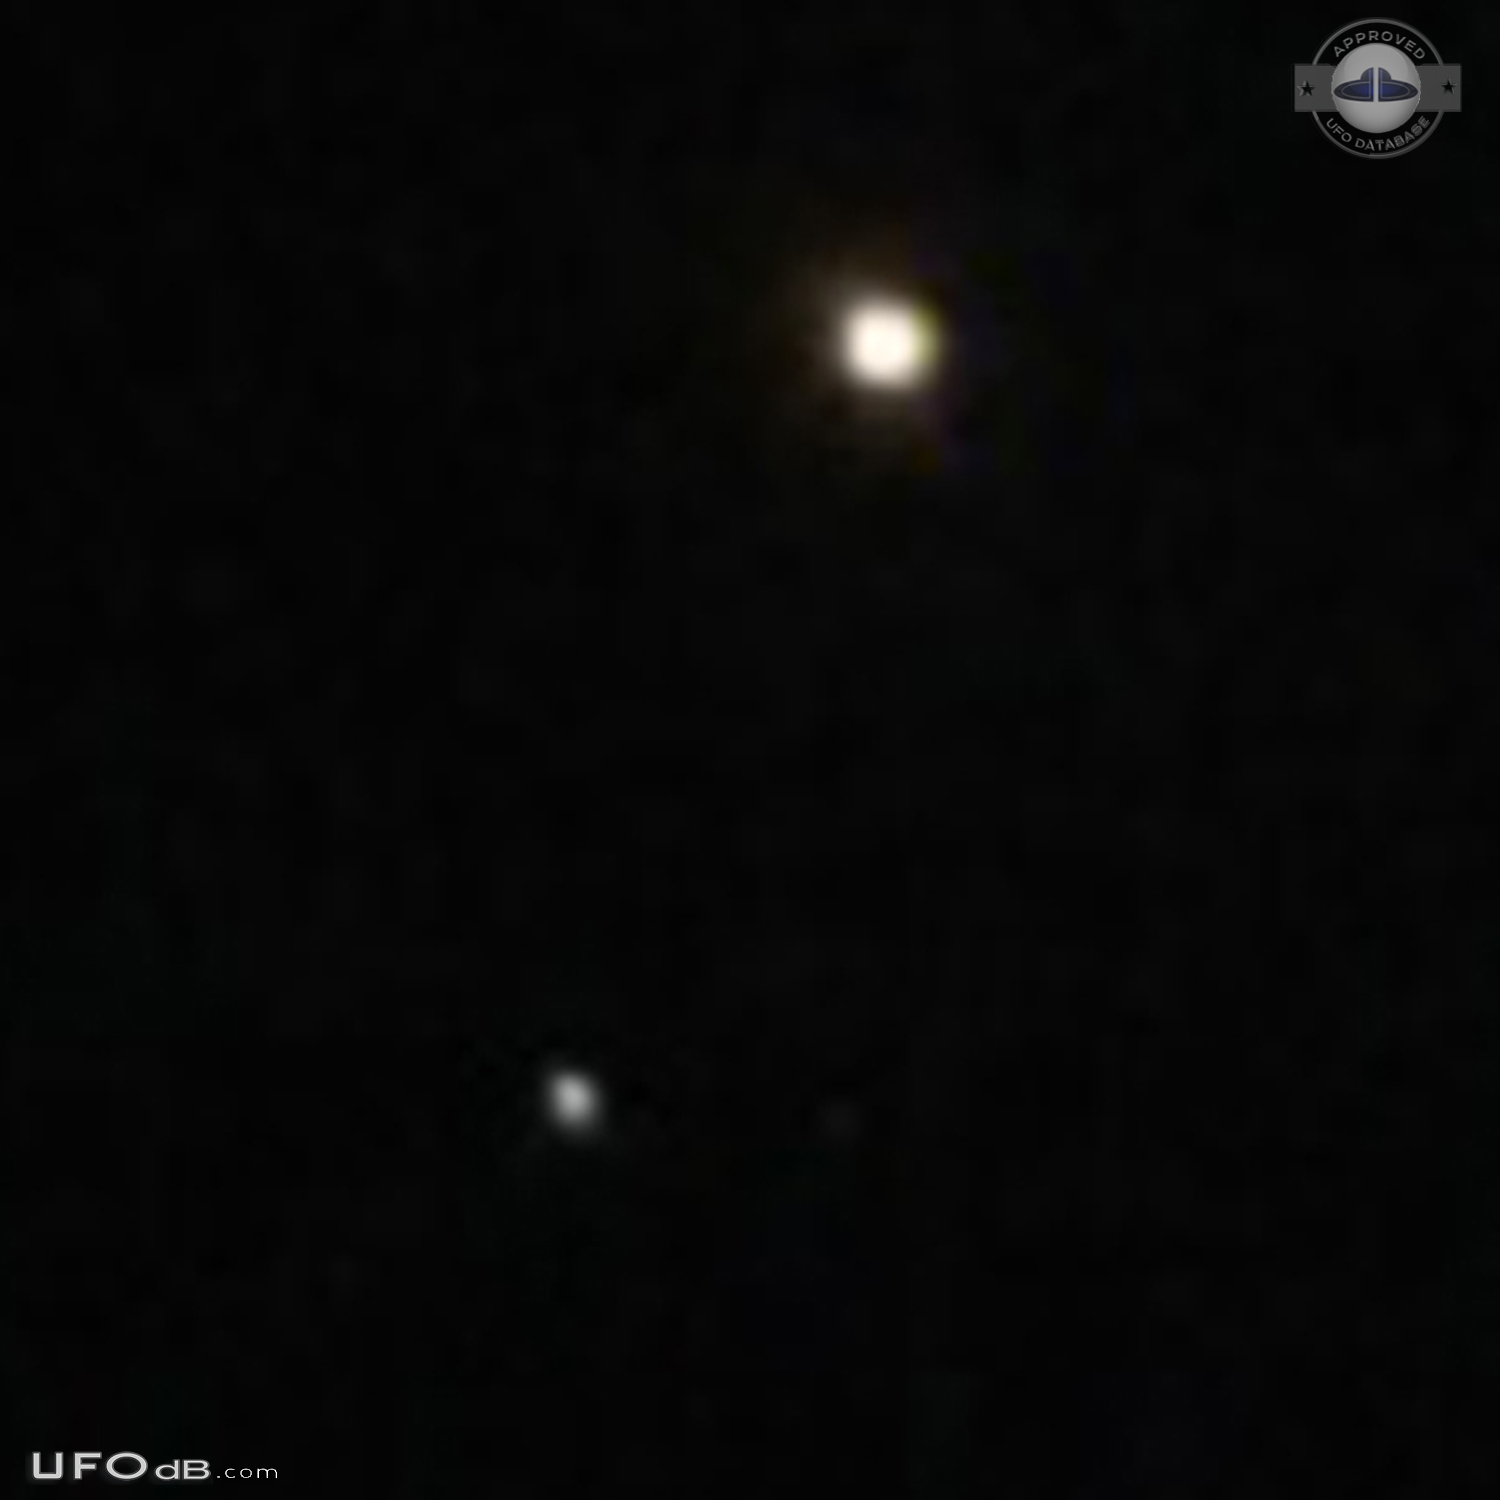 Multi colored triangle with 3 smaller orbs UFOS - Florida USA 2015 UFO Picture #679-3